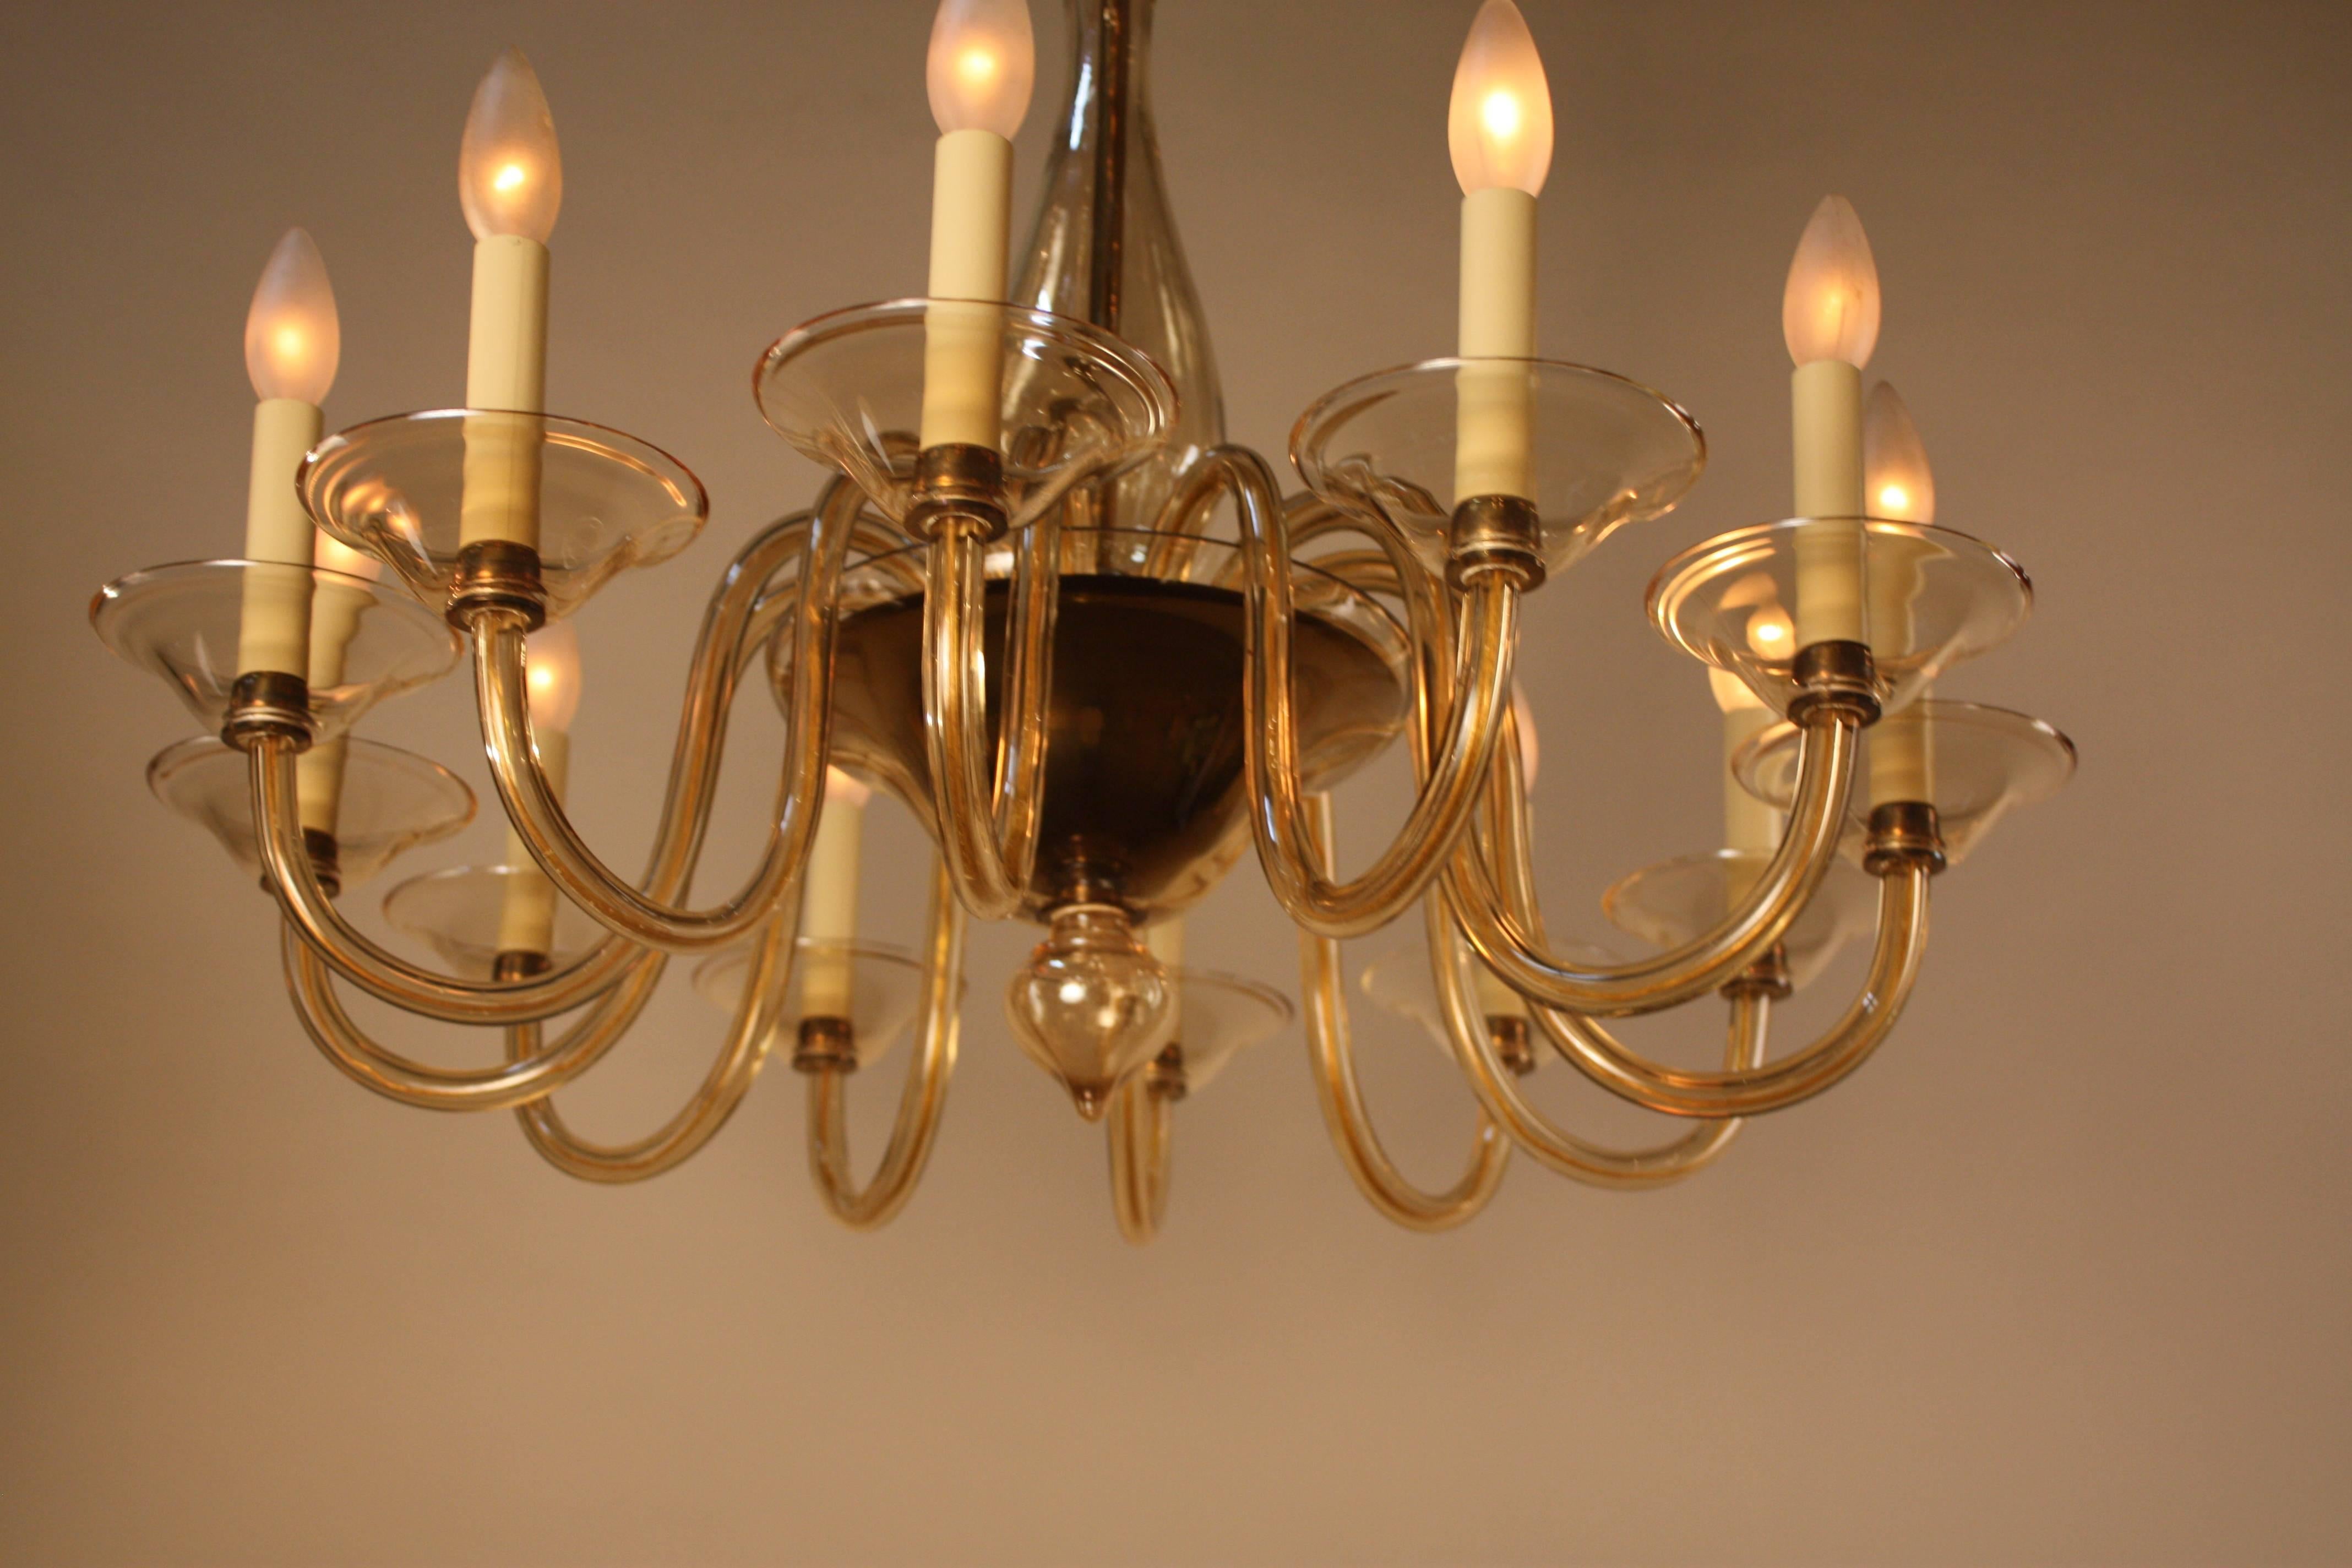 A handblown glass chandelier made of famed Murano glass. Simple yet elegant, this twelve-light piece is in a champagne color and dates from the 1970s. 
The minimum height fully installed is 30